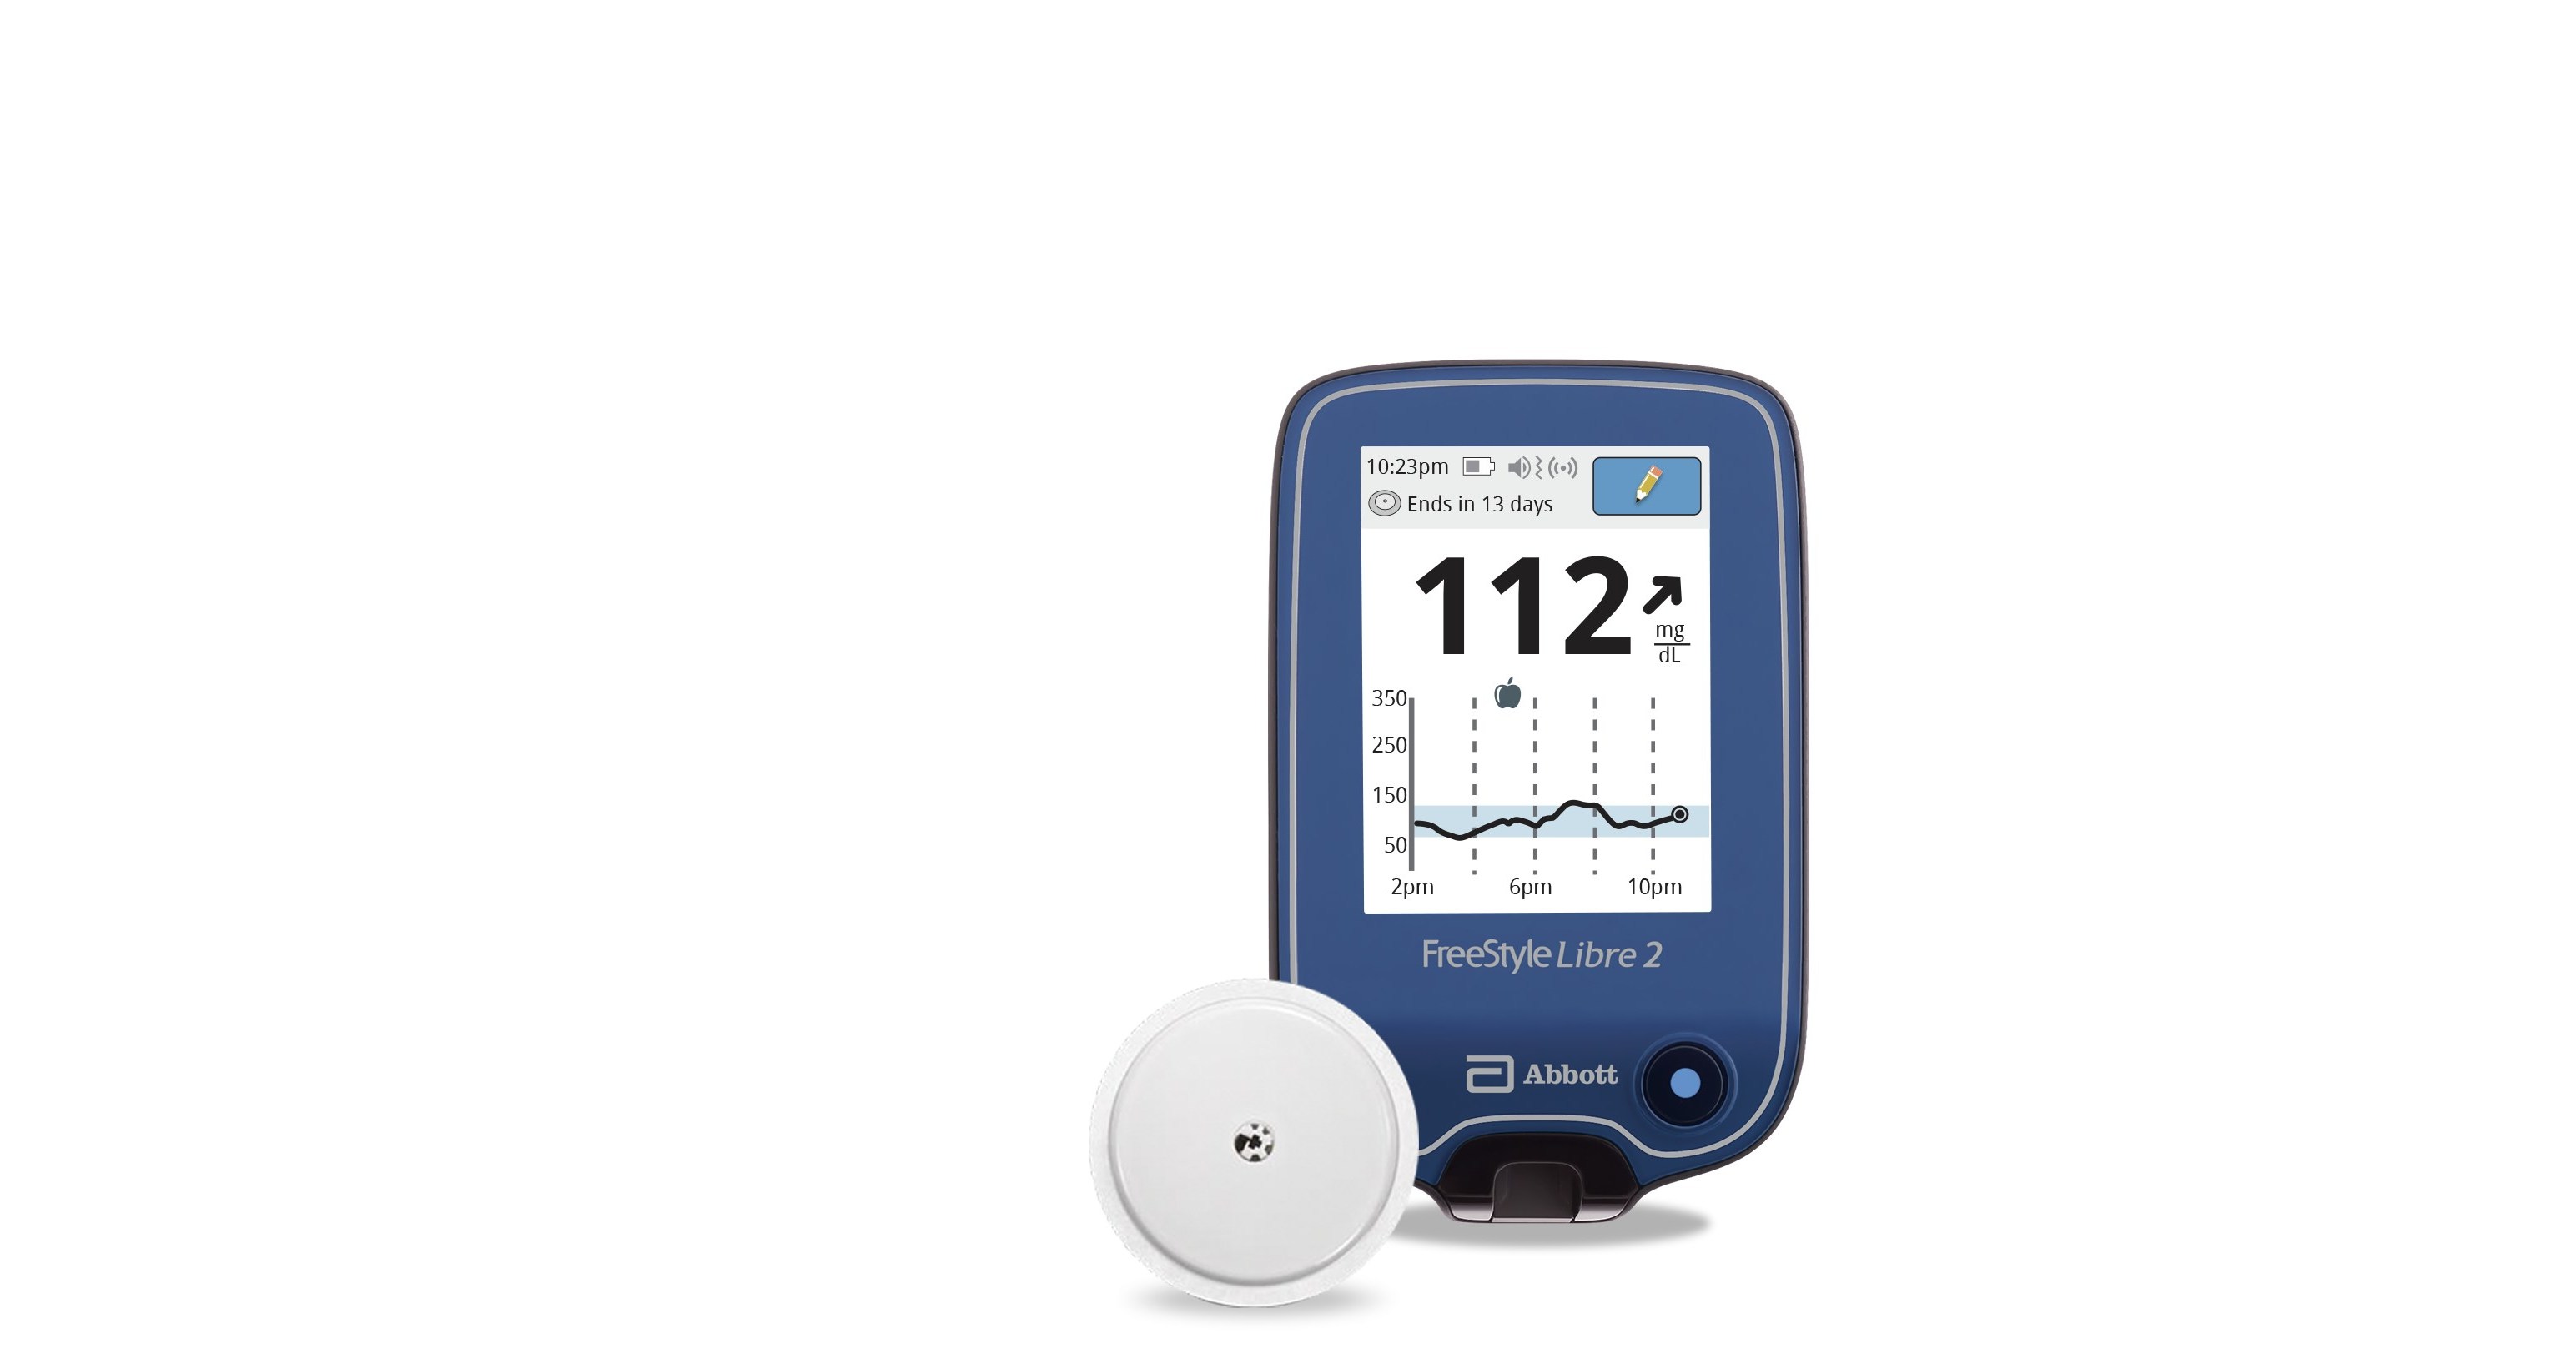 Abbott S Freestyle Libre 2 Icgm Cleared In U S For Adults And Children With Diabetes Achieving Highest Level Of Accuracy And Performance Standards